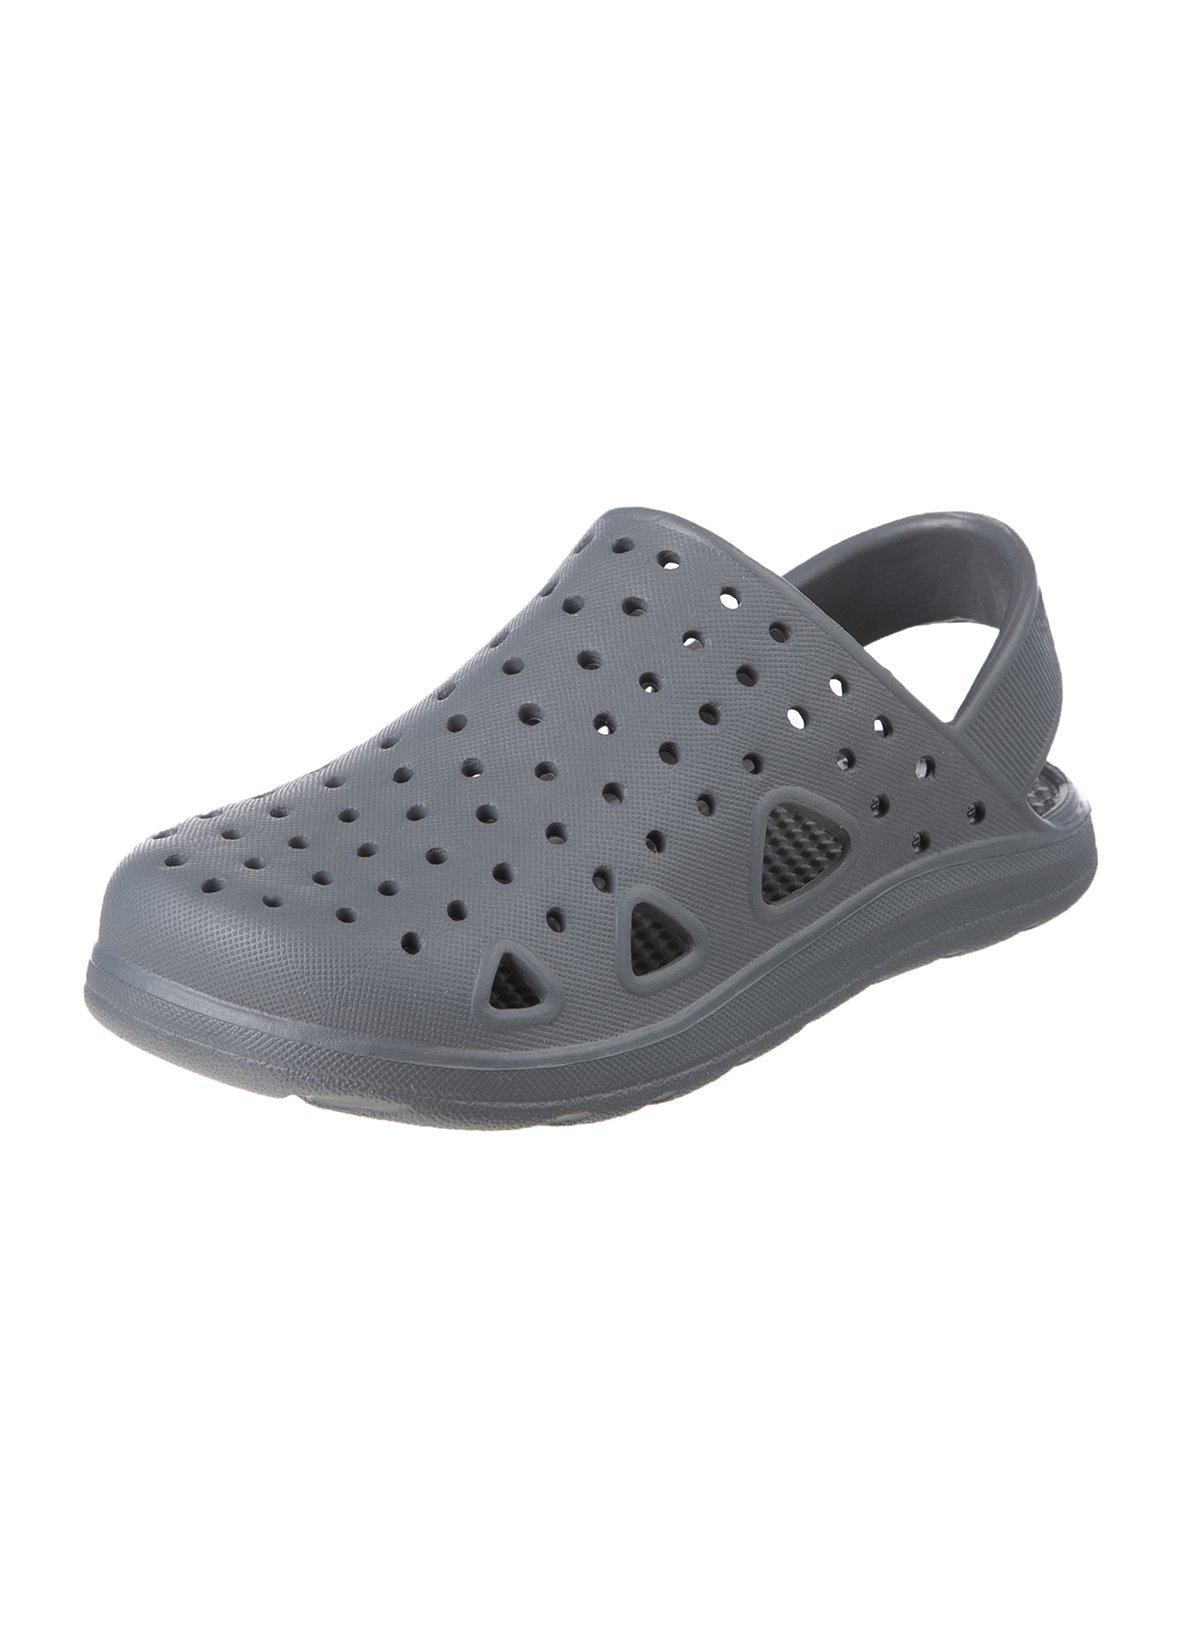 Sol Bounce Grey Clogs Review